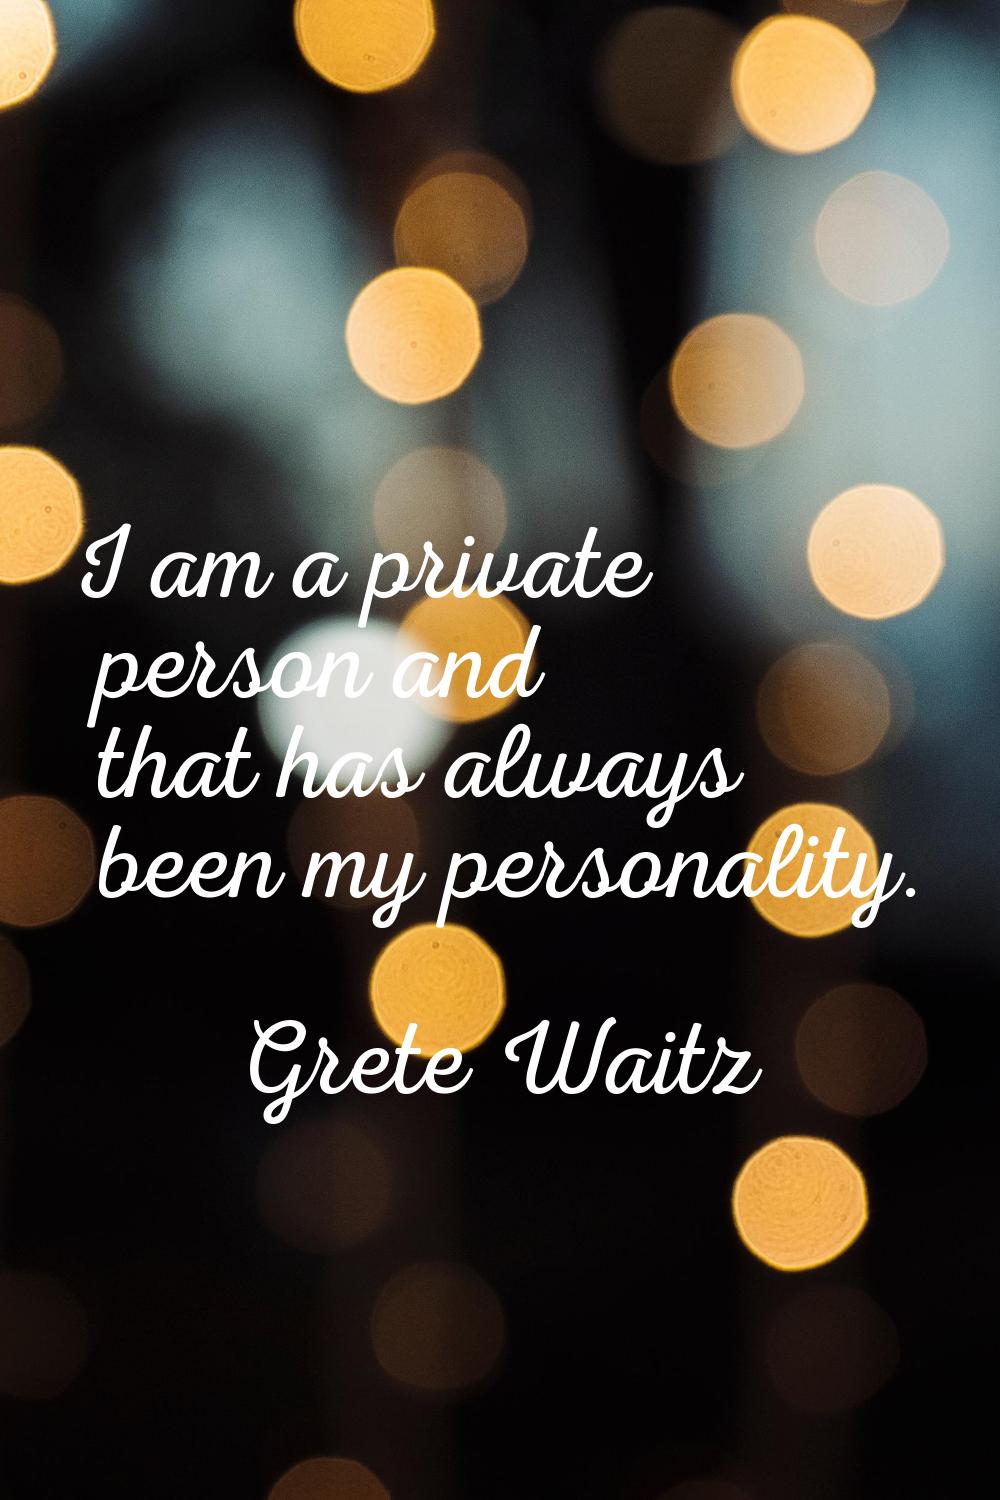 I am a private person and that has always been my personality.